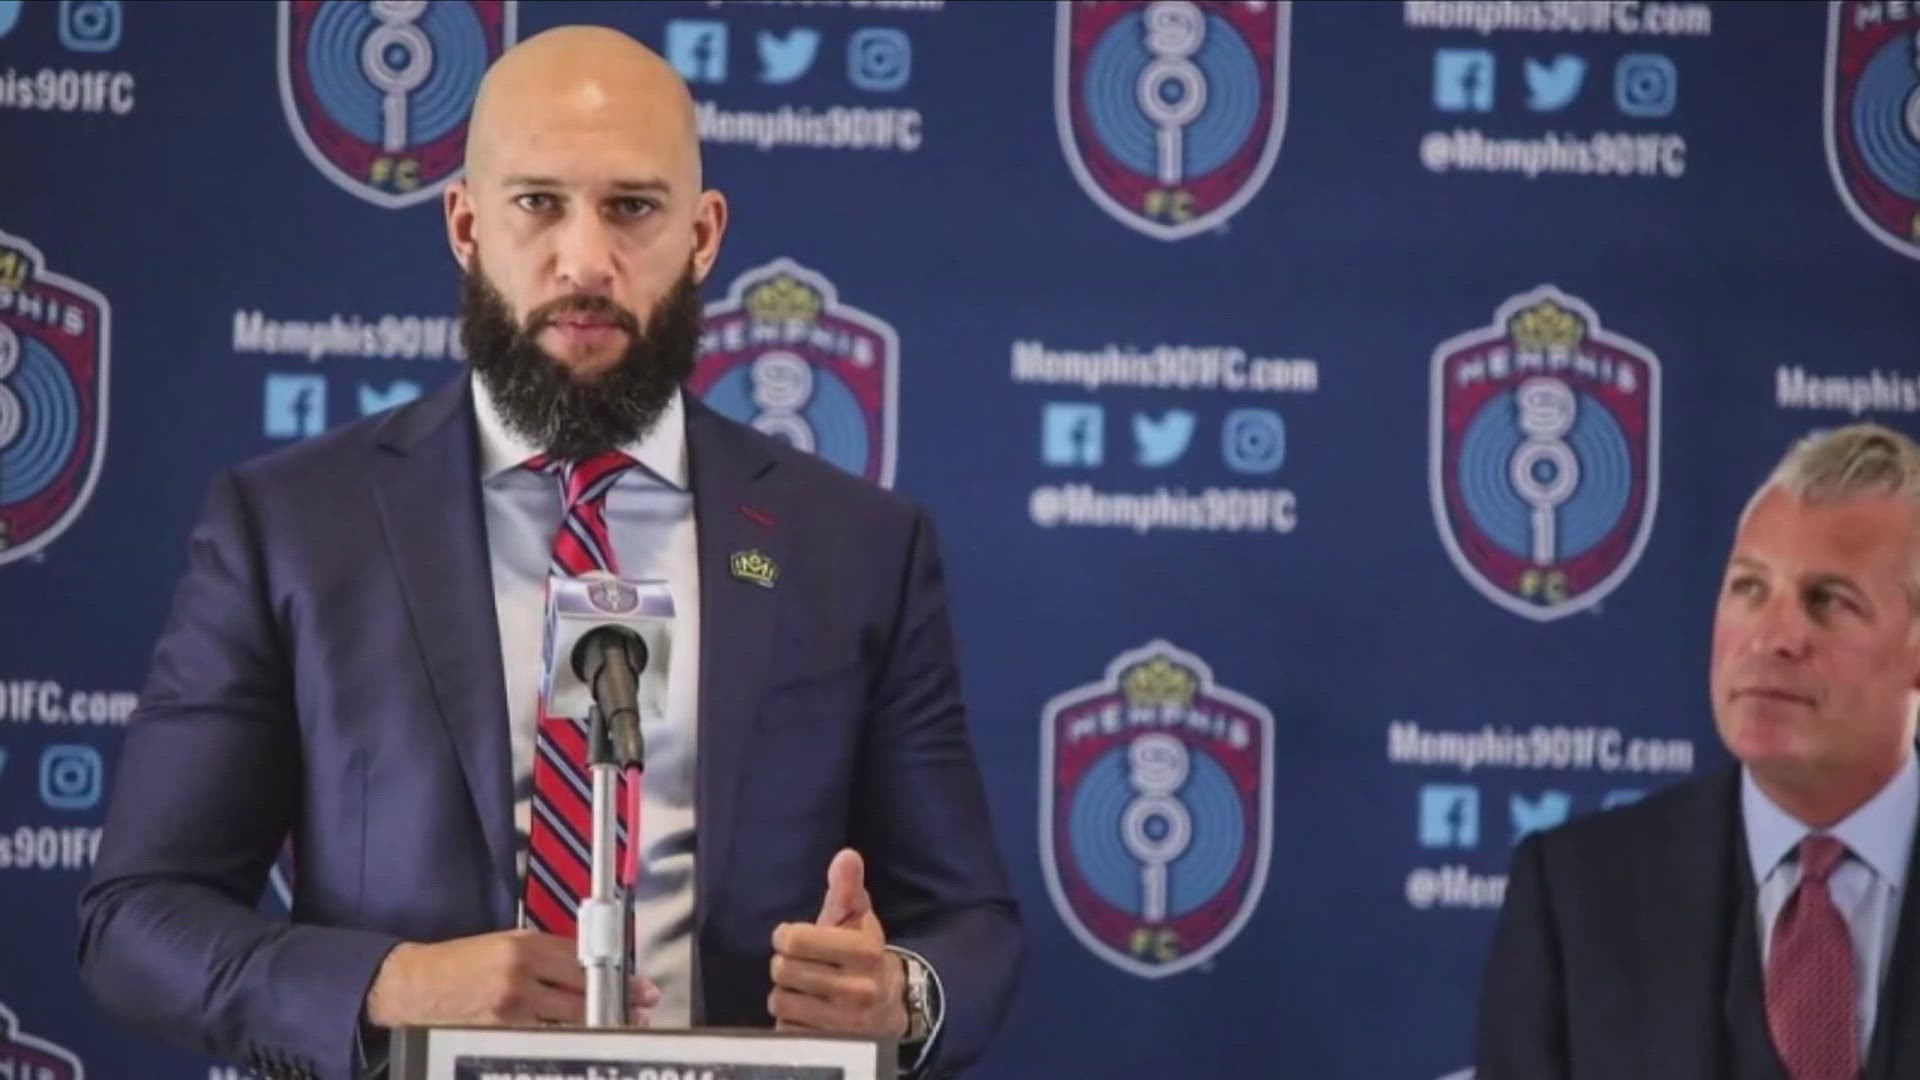 Sporting Director and Minority Owner Tim Howard choosing to part ways with the club after five years.